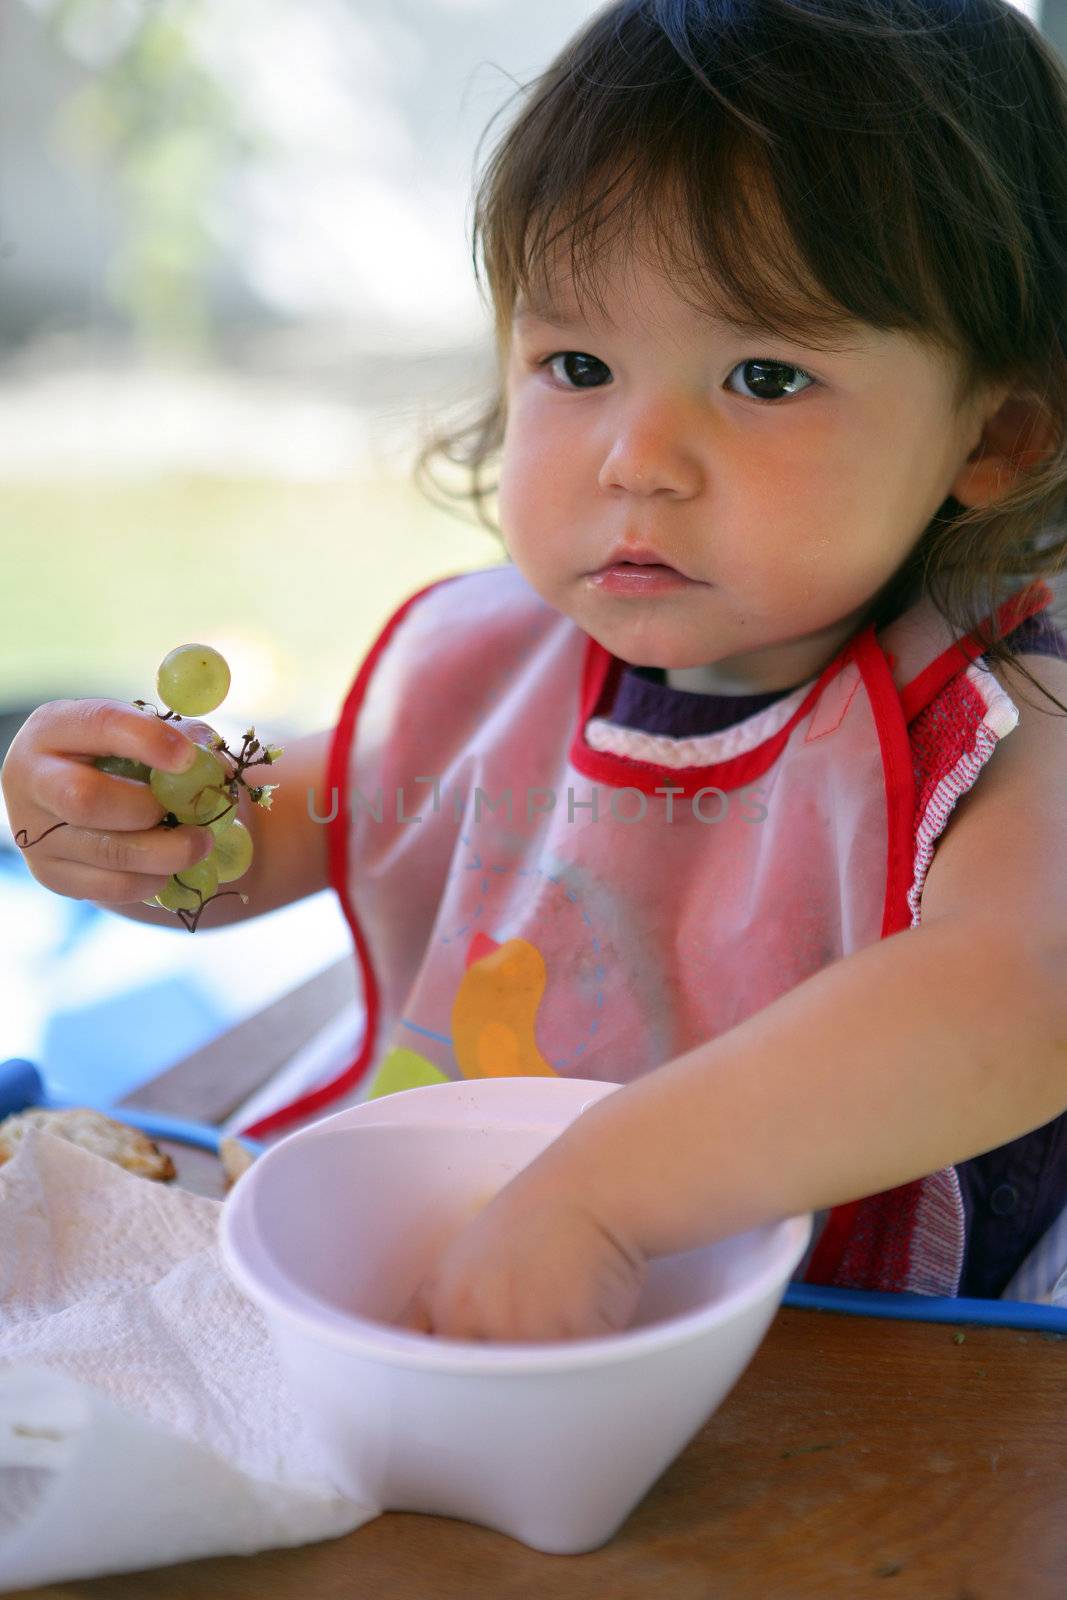 Little girl eating grapes from a bowl by phovoir